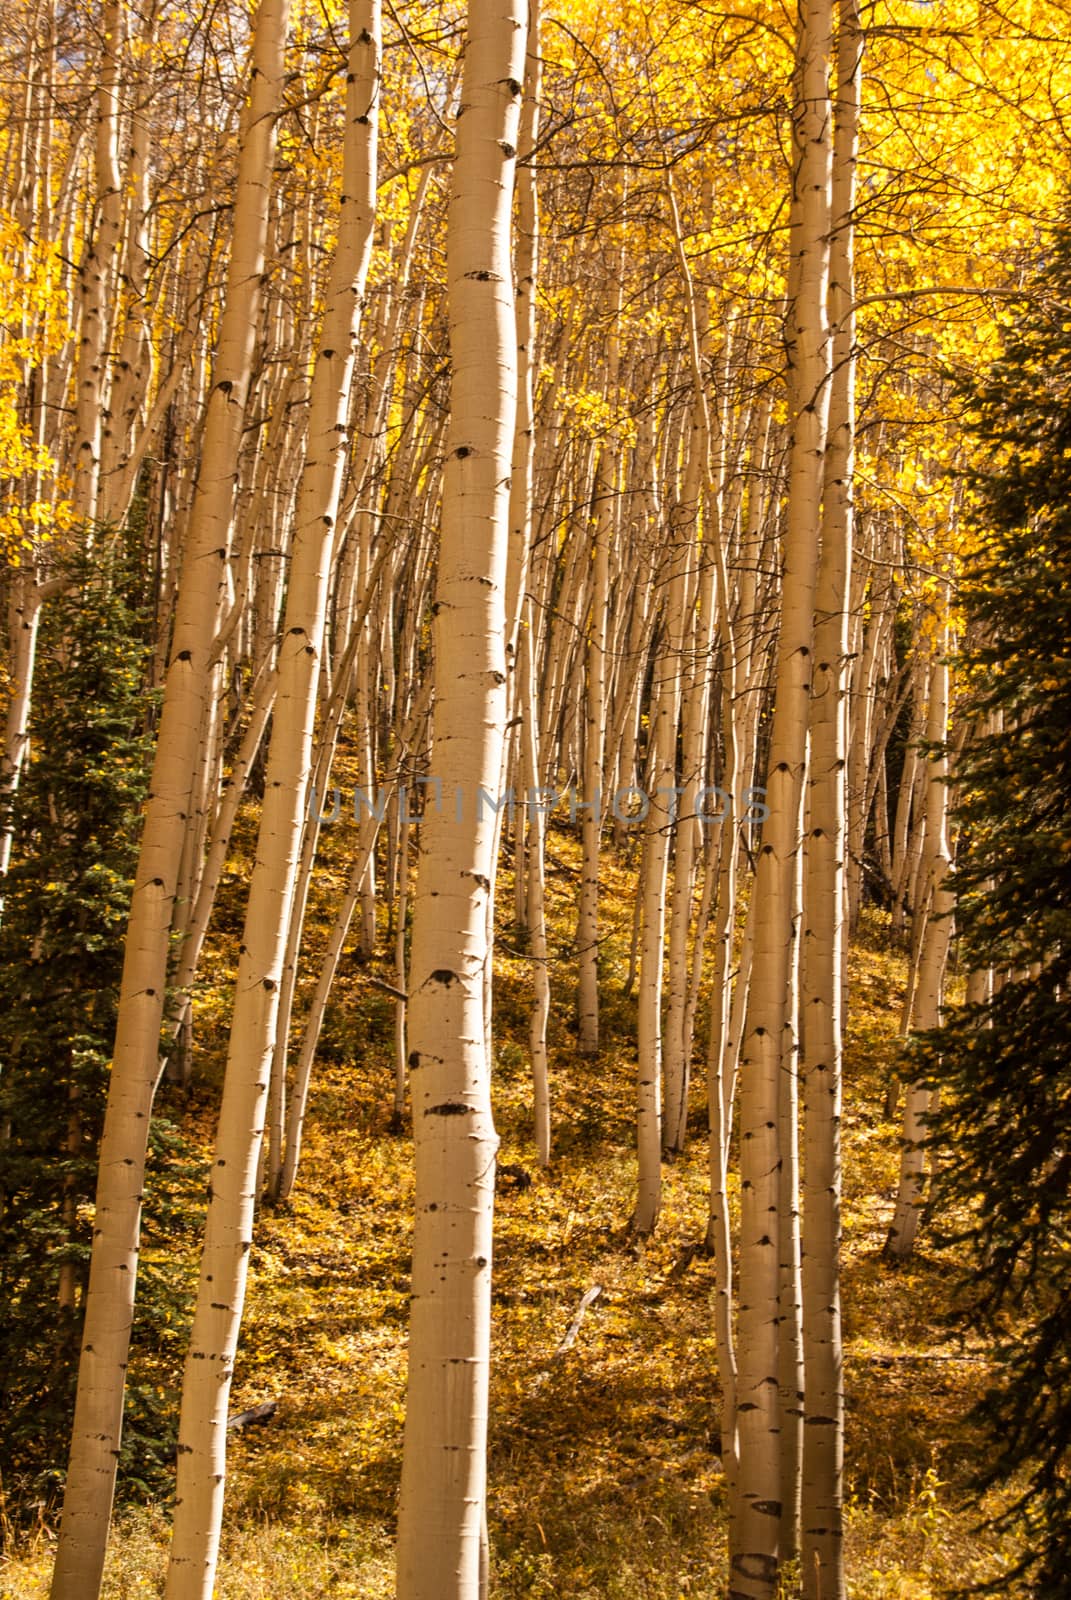 A Tangle of Aspens by emattil